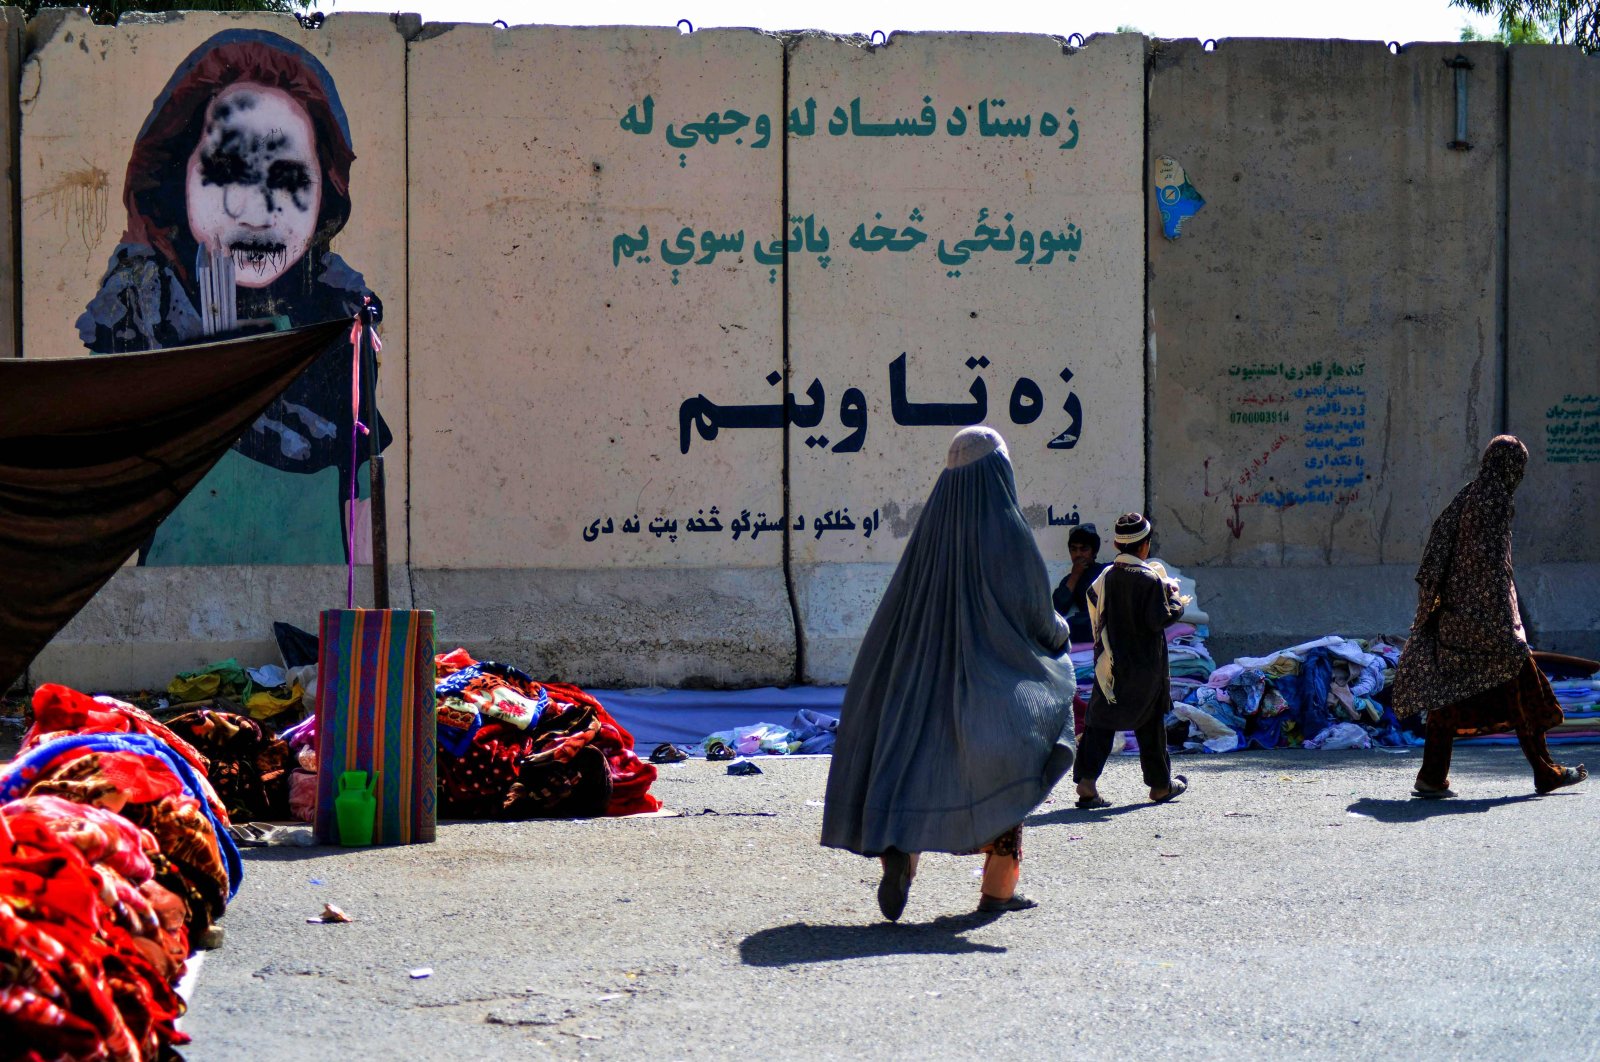 Women walk past a vendor selling secondhand clothes near a defaced mural at a market in Kandahar, Afghanistan, Sept. 22, 2021. (AFP Photo)